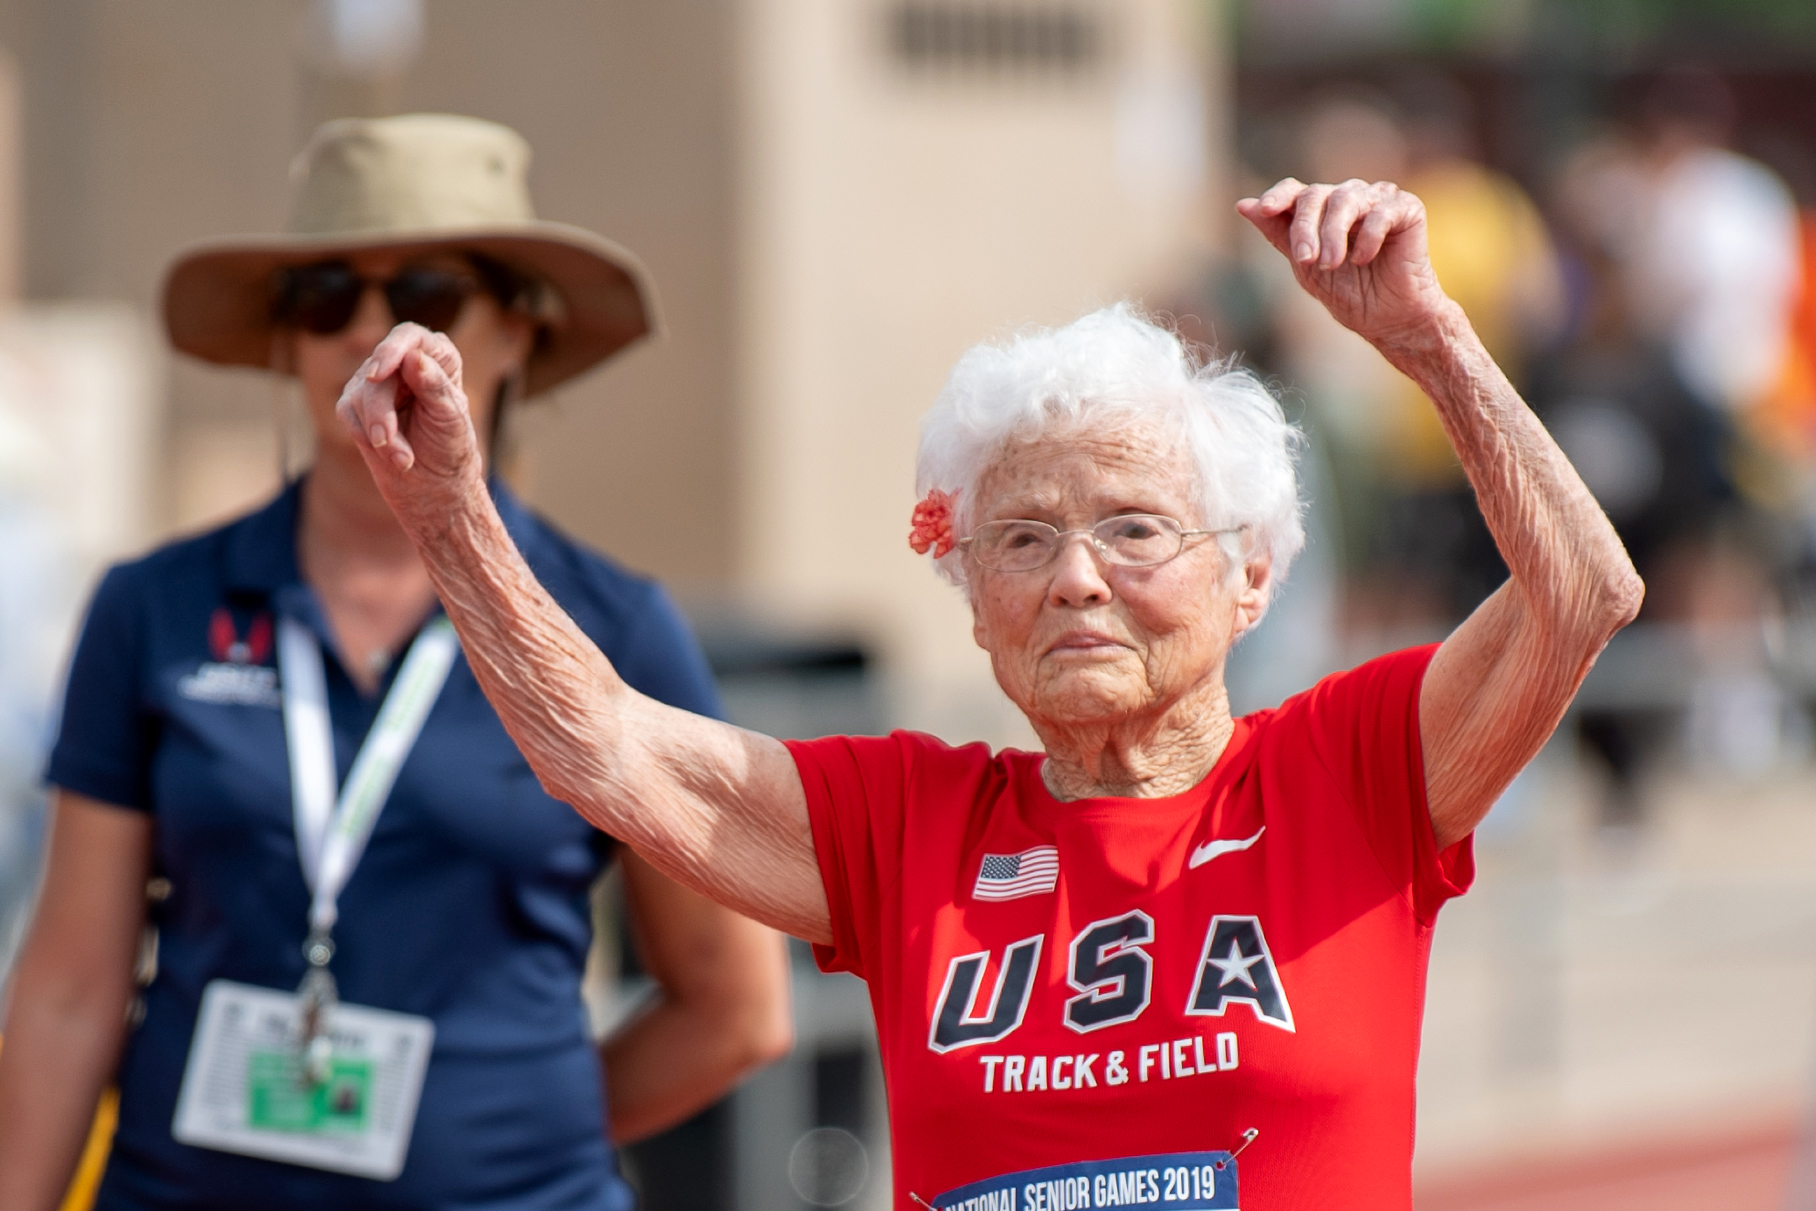 PHOTO: Julia Hawkins celebrates her win at the 50-meter race at the 2019 National Senior Games in Albuquerque, New Mexico.